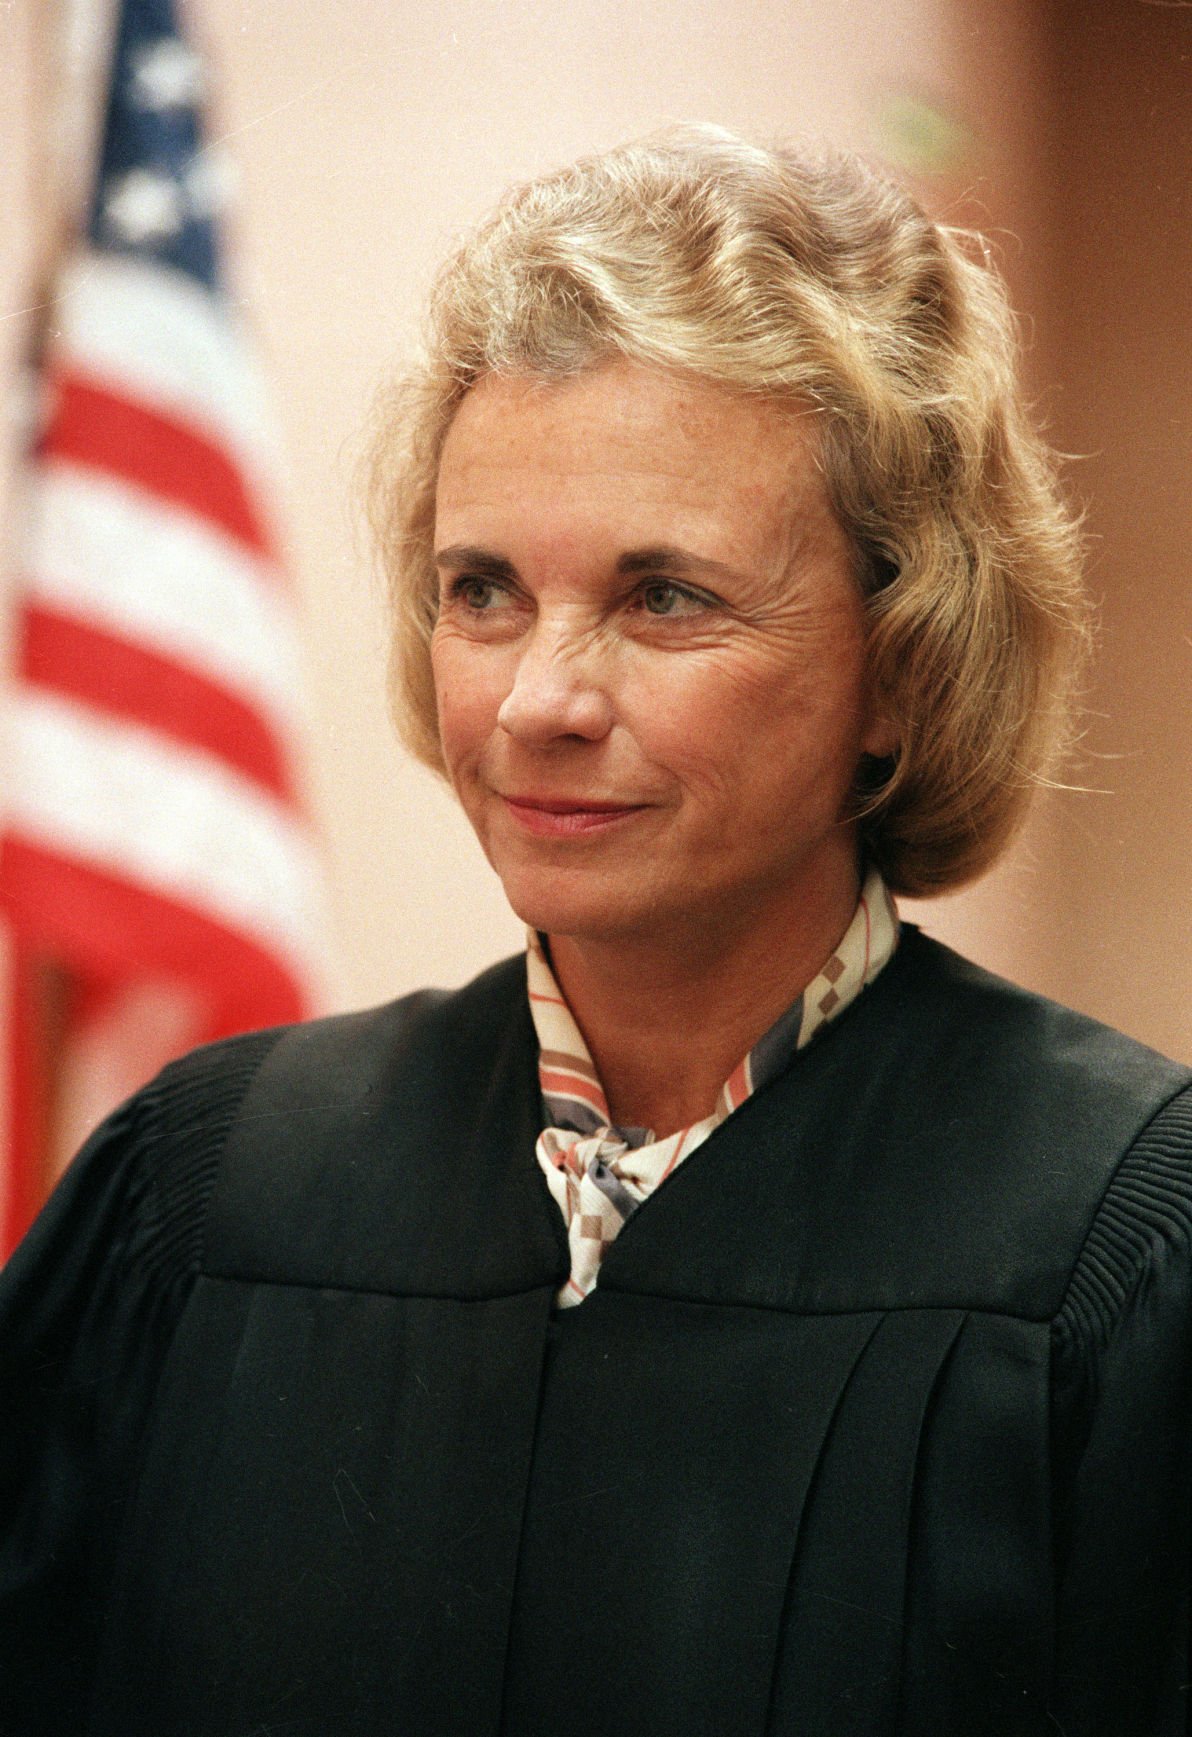 who was sandra day o connor